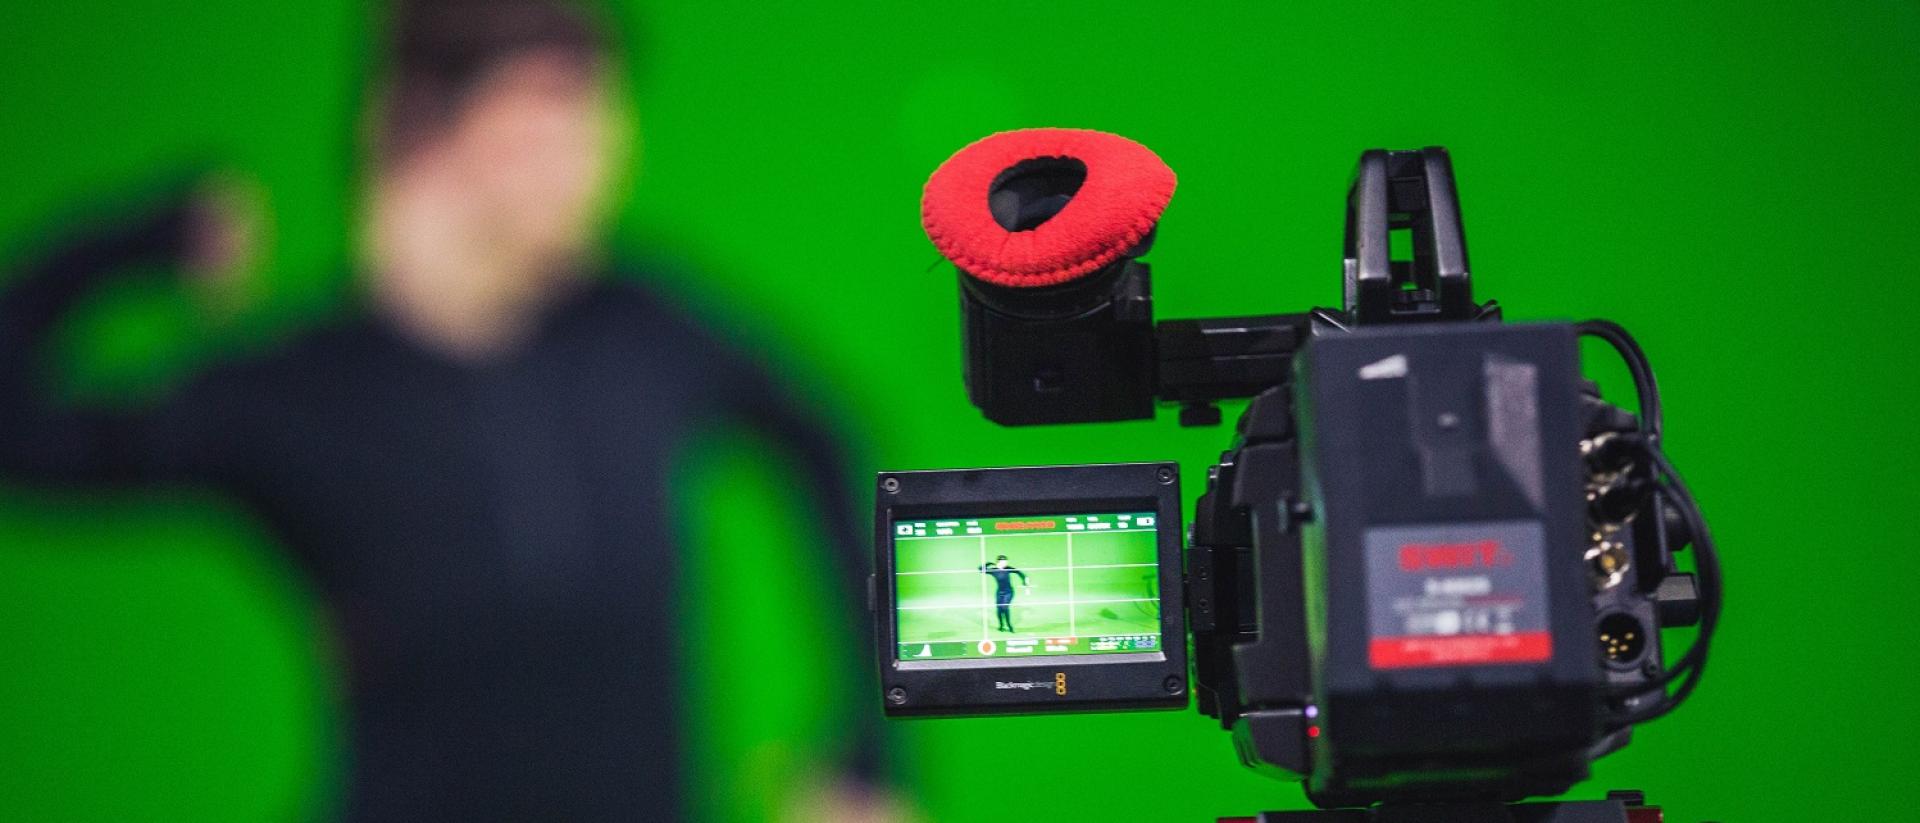 a camera recording a person performing in front of a greenscreen